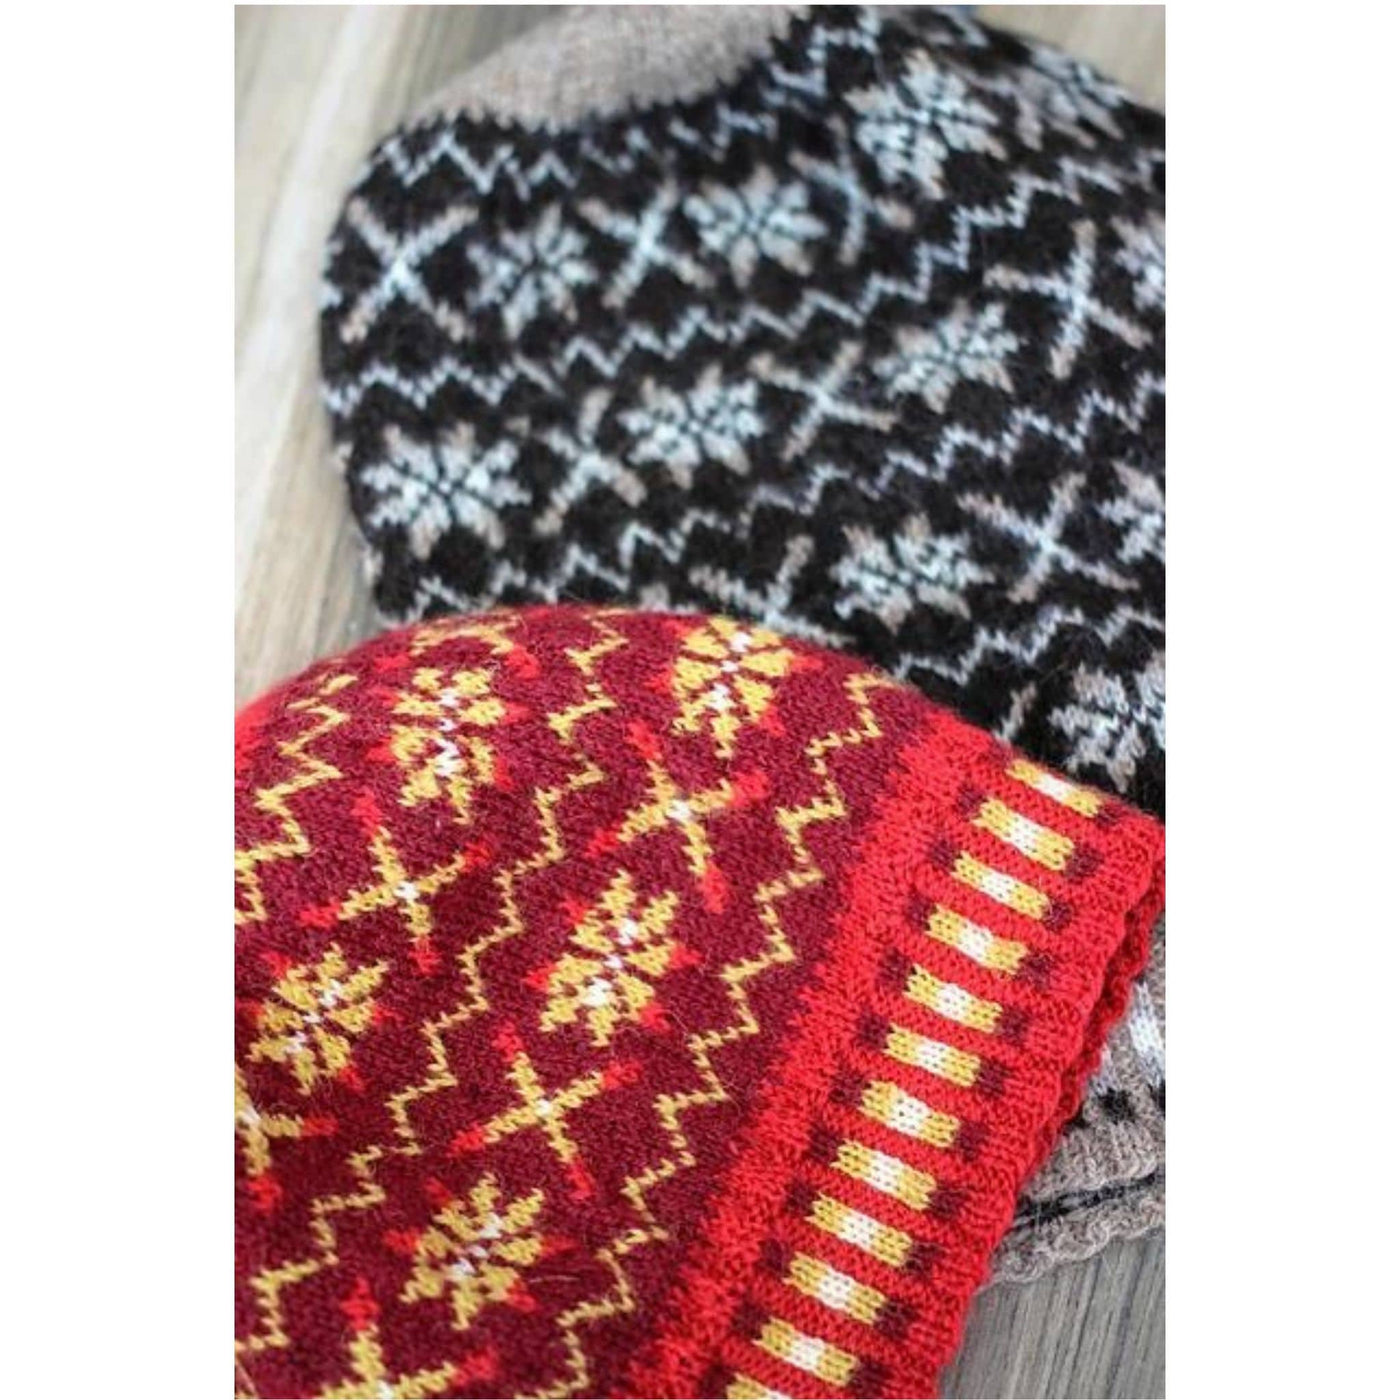 Two Fair Isle hats lying flat on table. One in Berry Wine colorway and one in Shetland Black colorway. Pattern is Tirval's Toorie (hat). Knit with Jamieson & Smith Heritage yarn. 